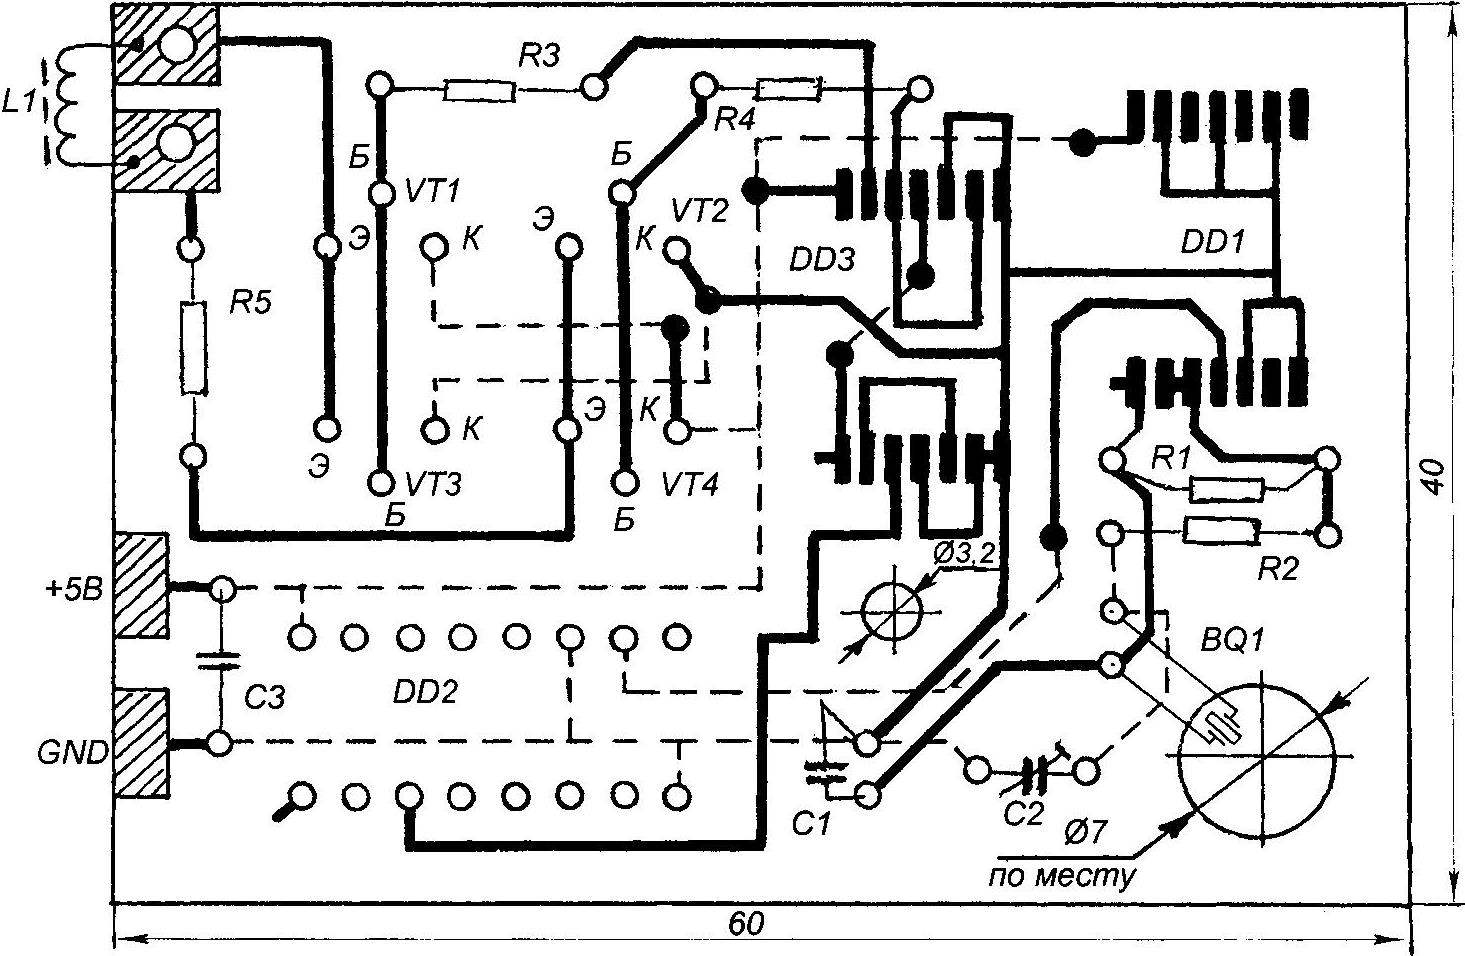 Fig. 3. A printed circuit Board, a homemade device